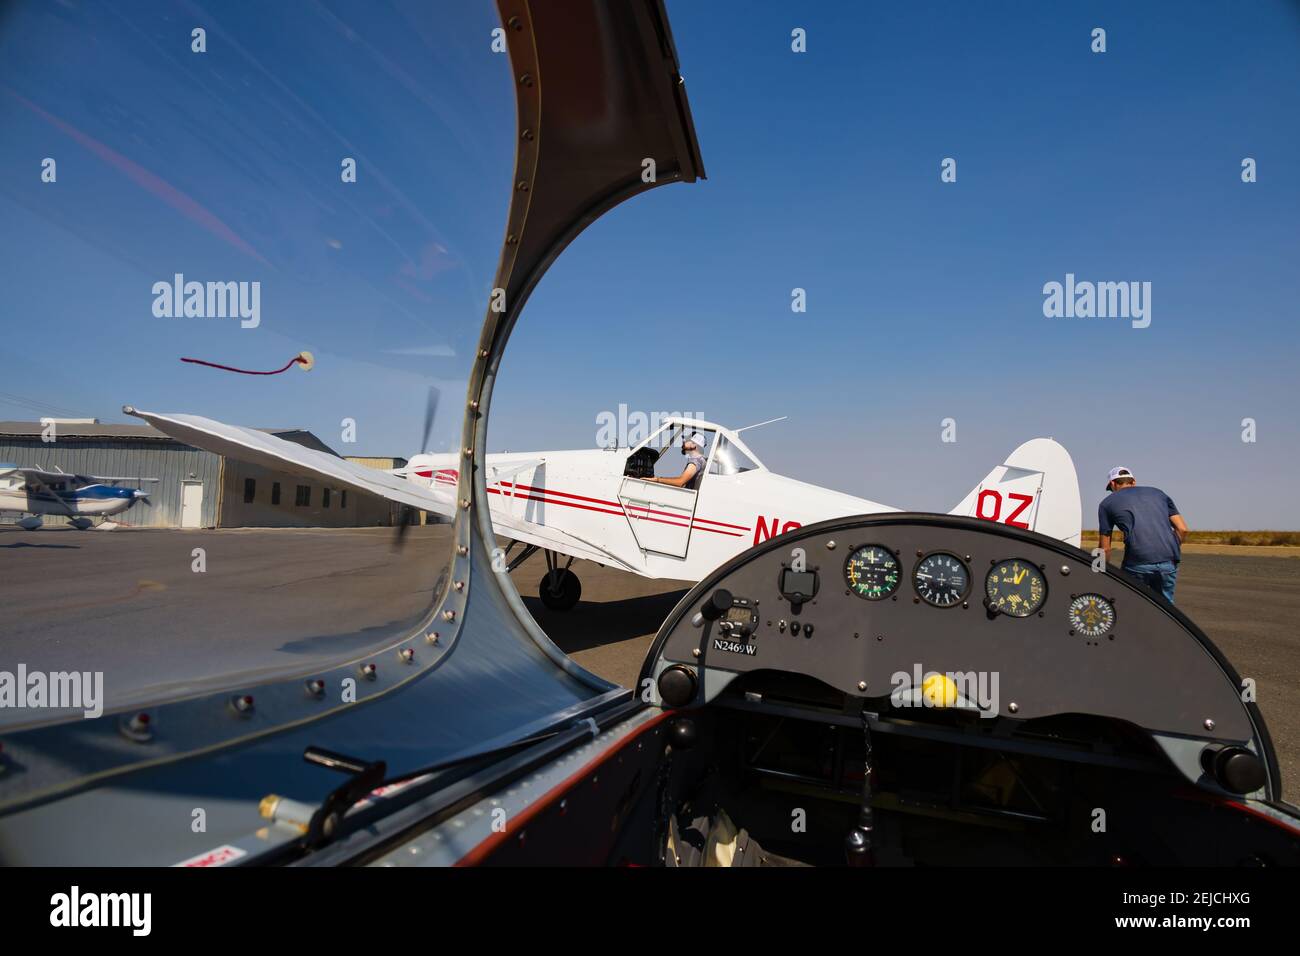 Attaching the tow cable to the Pawnee tug aircraft for aerotow. Schweizer SGS 2-32 glider cockpit and instrument panel at Williams soaring, California Stock Photo